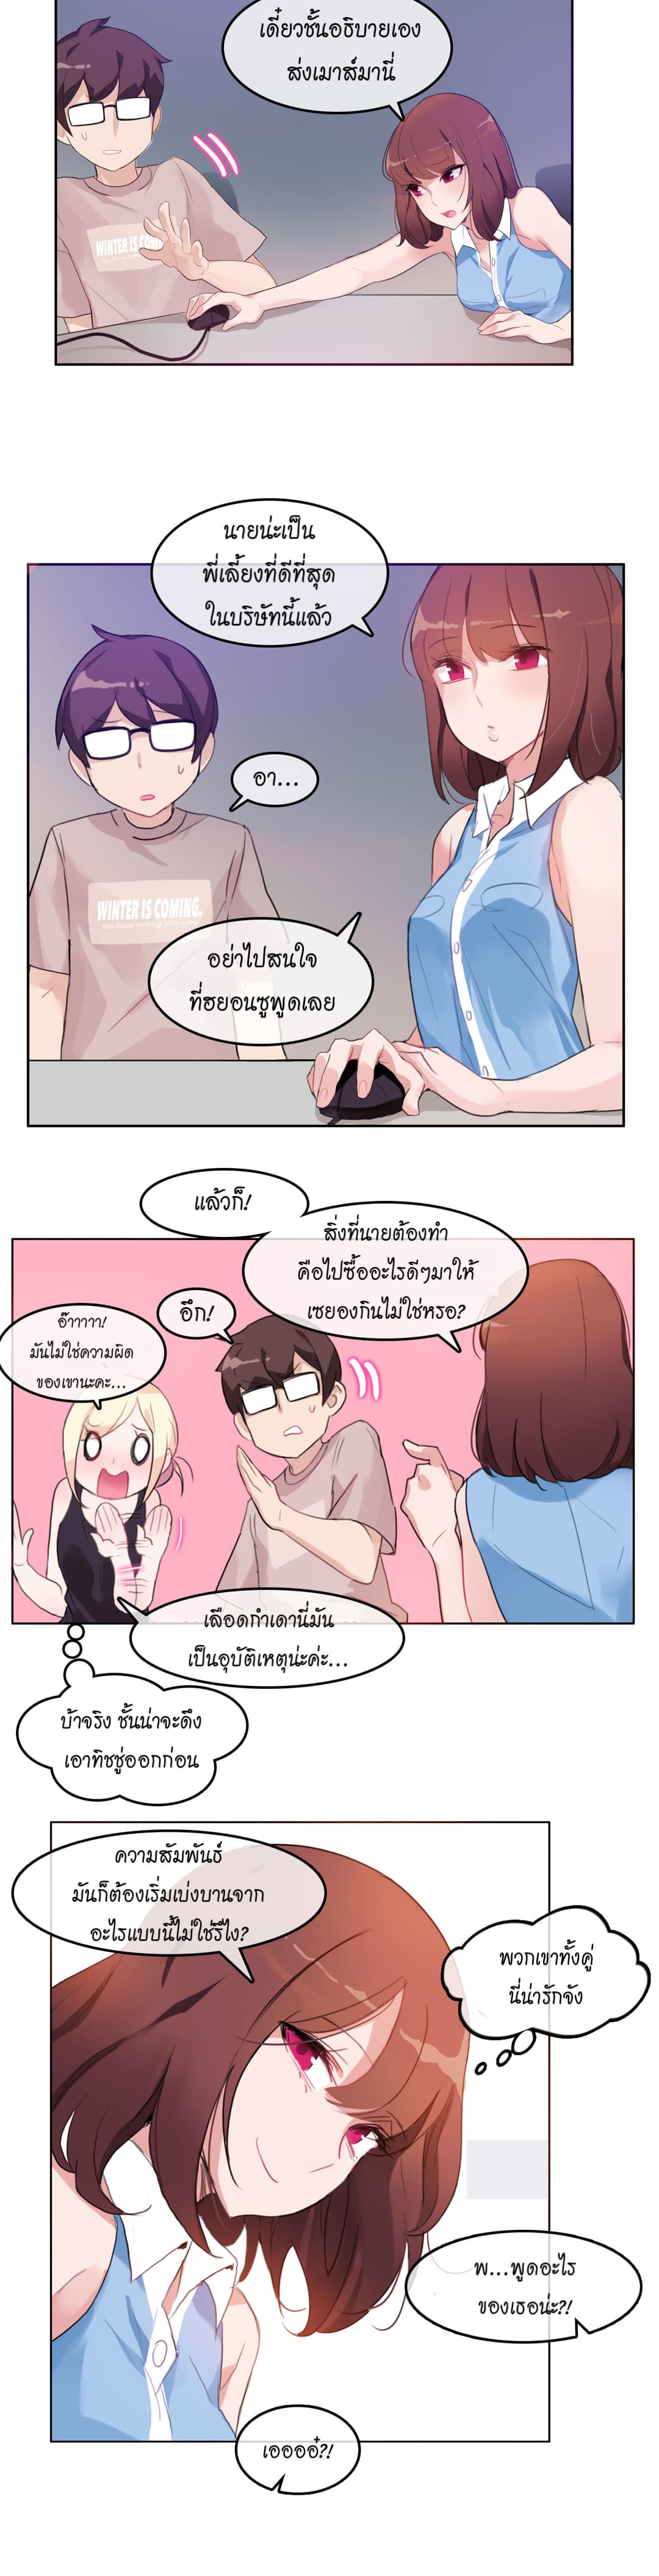 A Pervert’s Daily Life 6 (5)